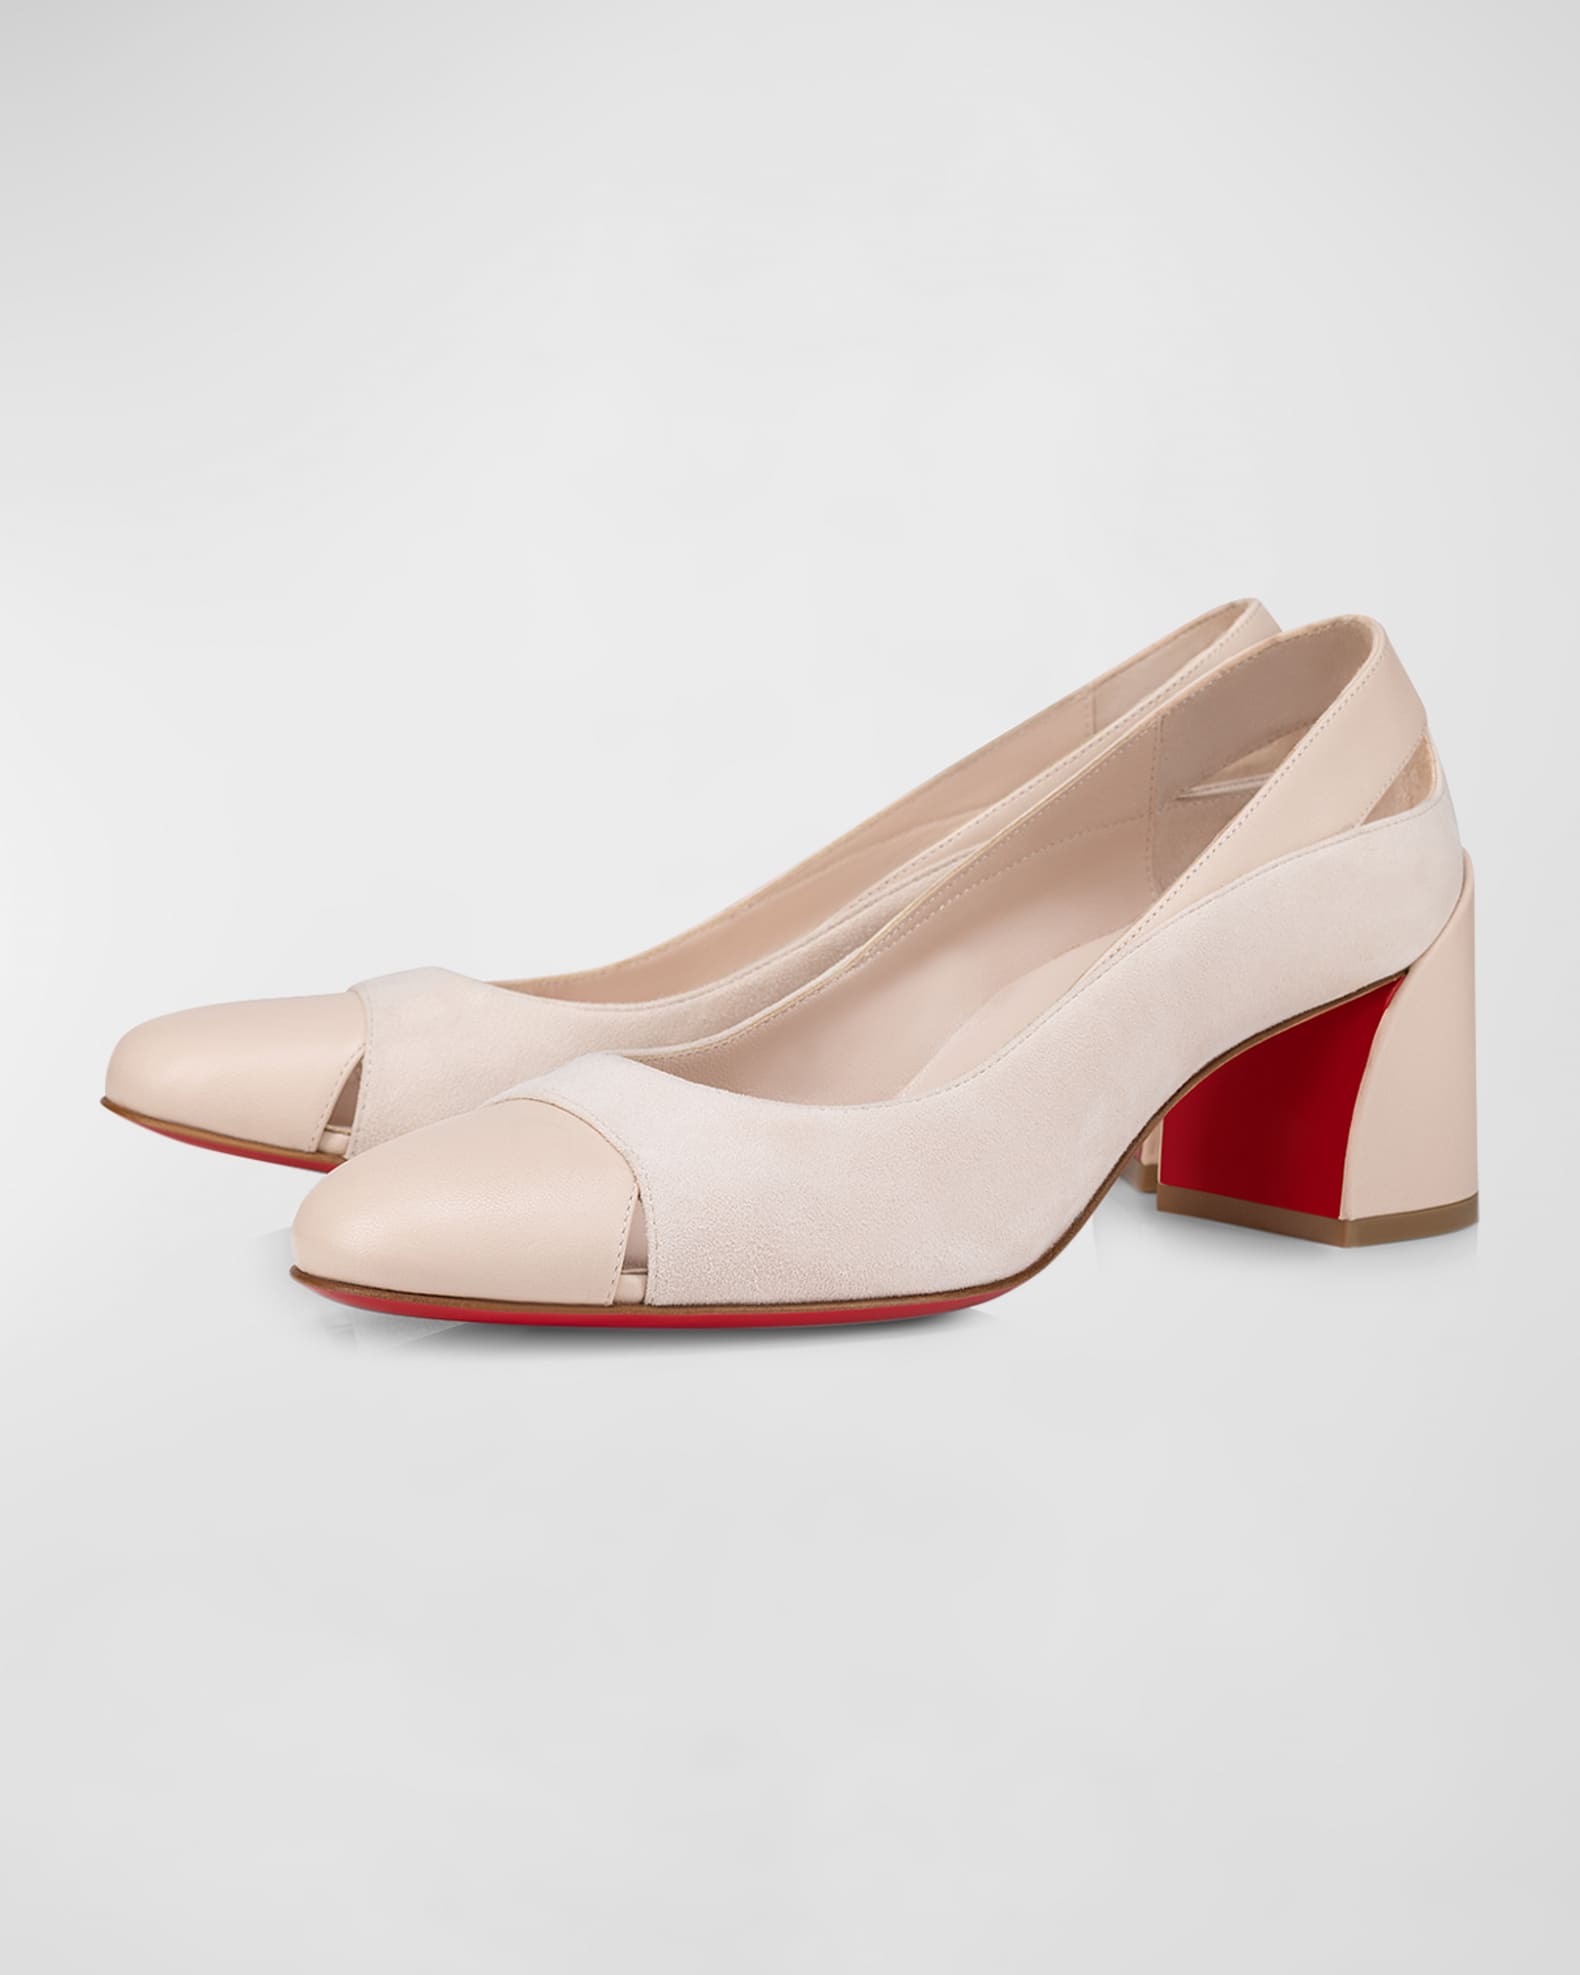 Christian Louboutin Miss Duvette Mixed Leather Red Sole Pumps